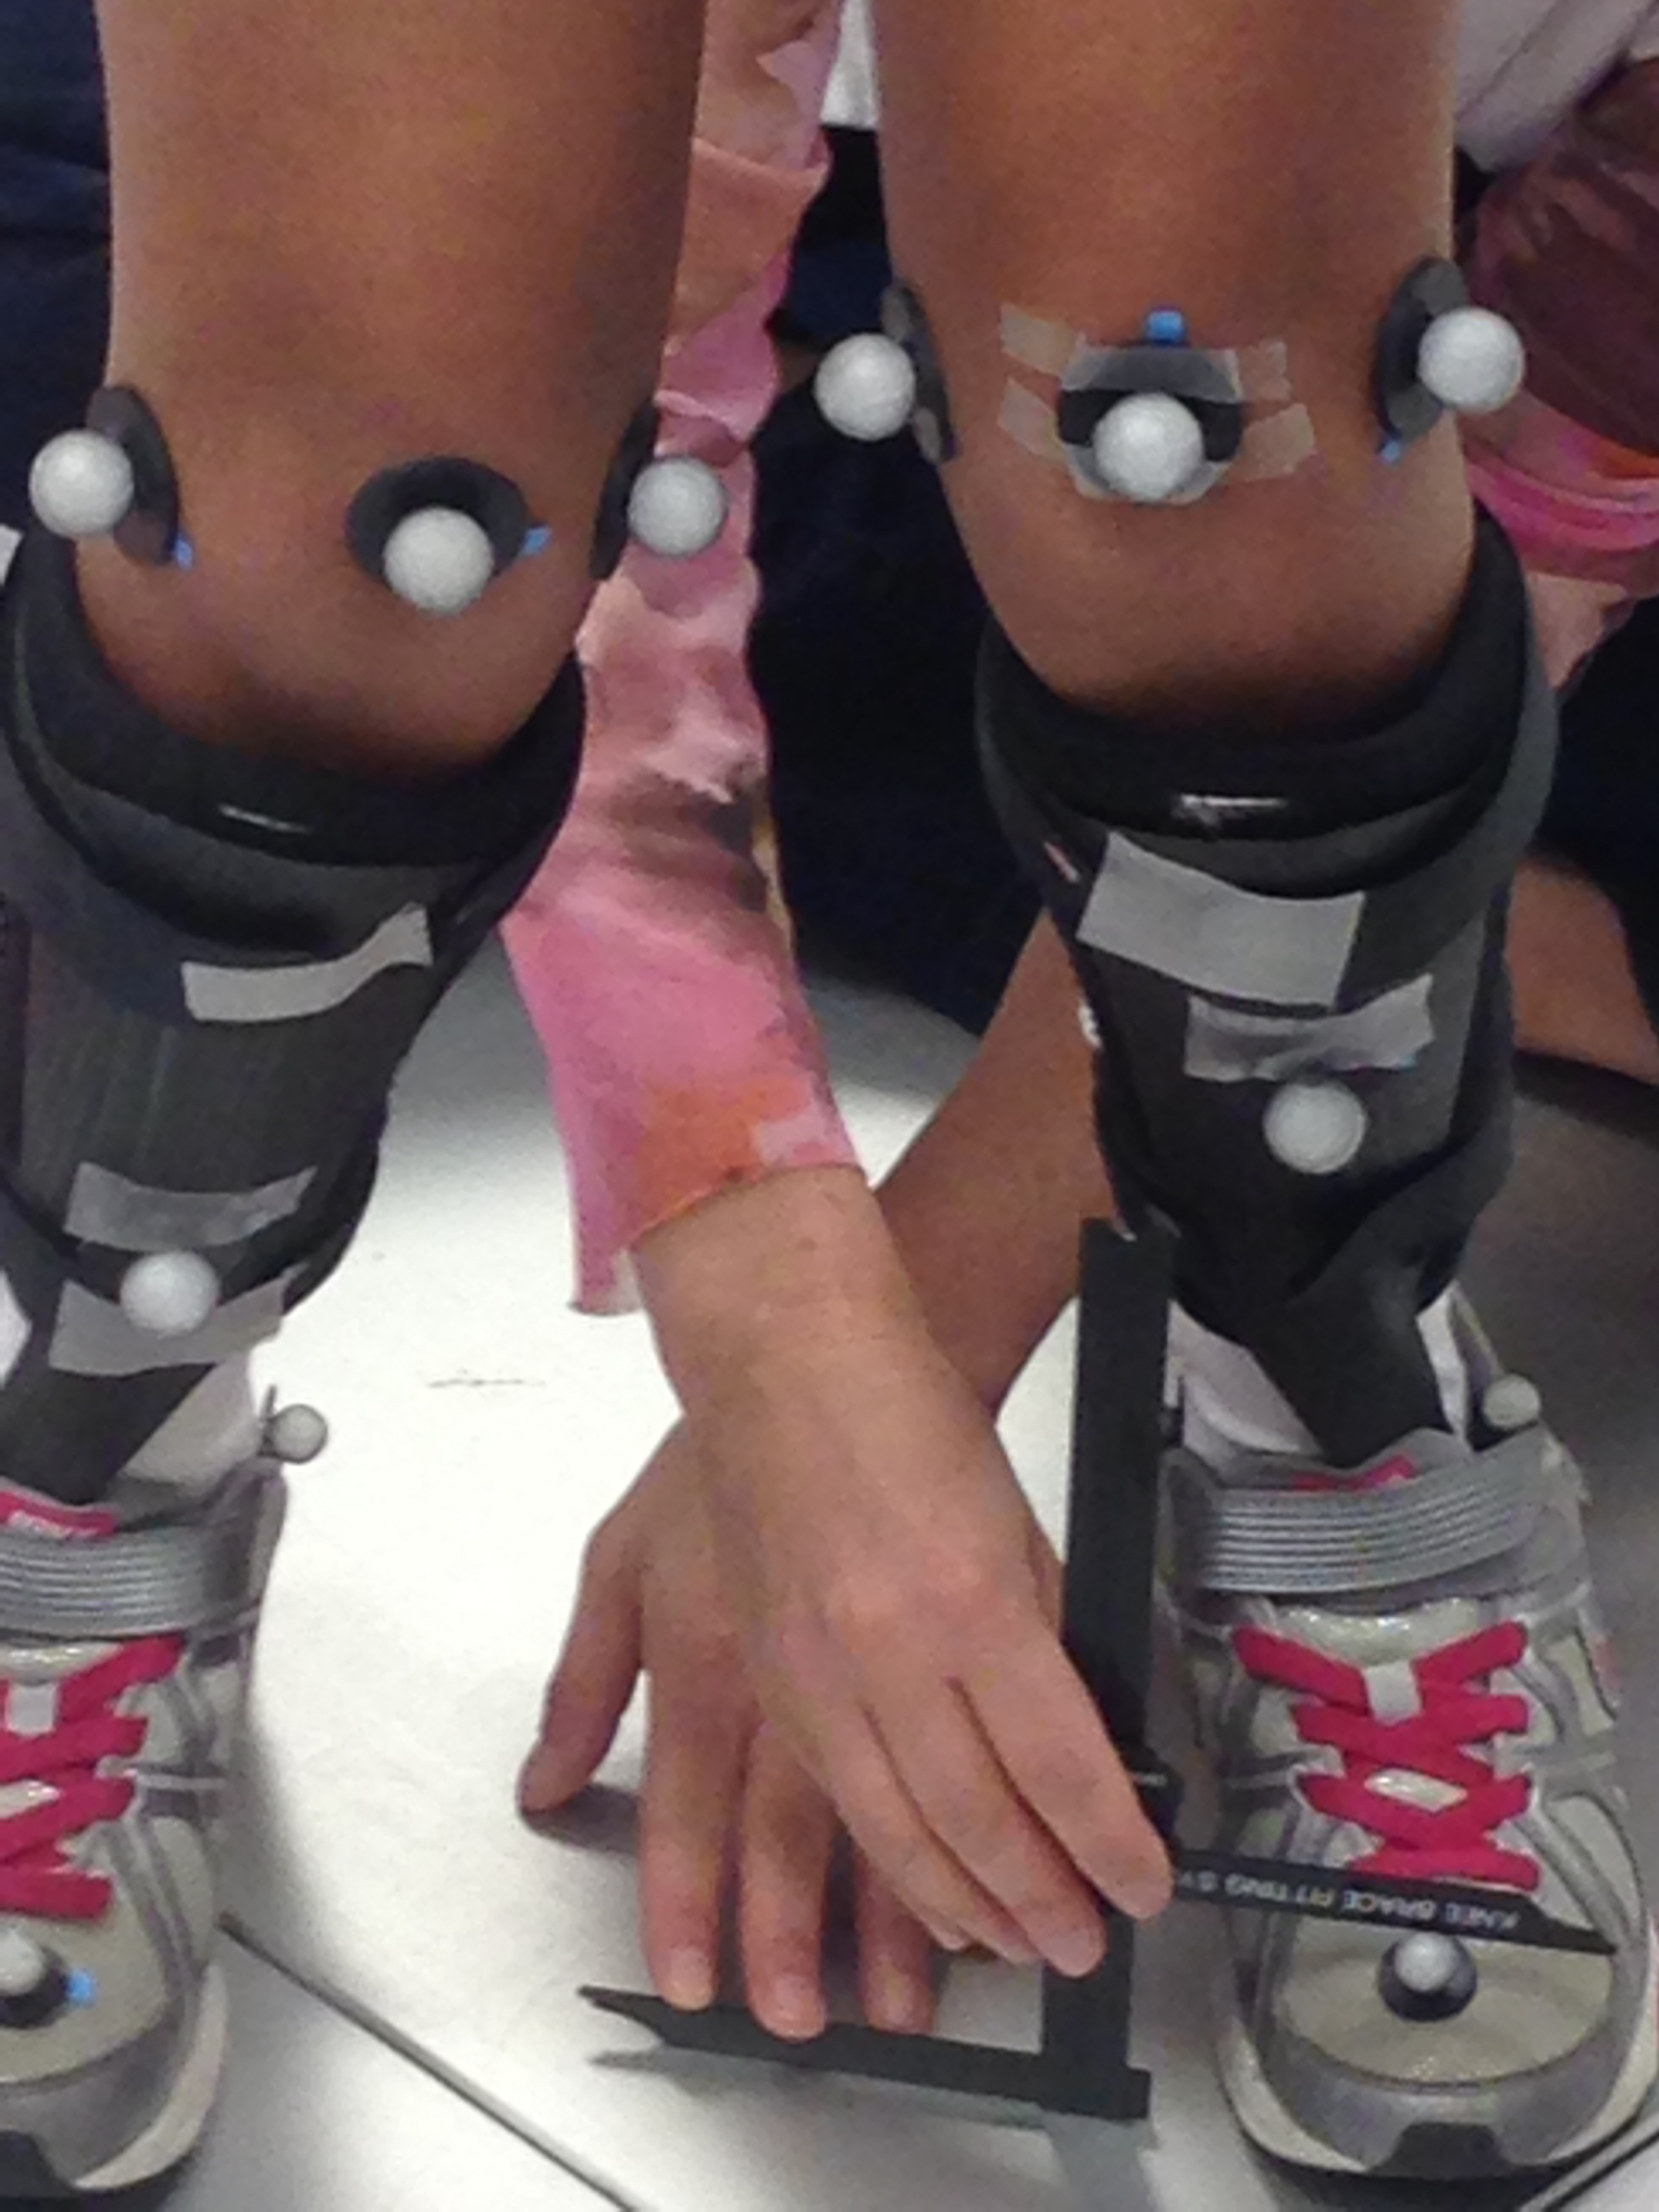 Reflective balls being placed throughout body for precise measurements of joint motion